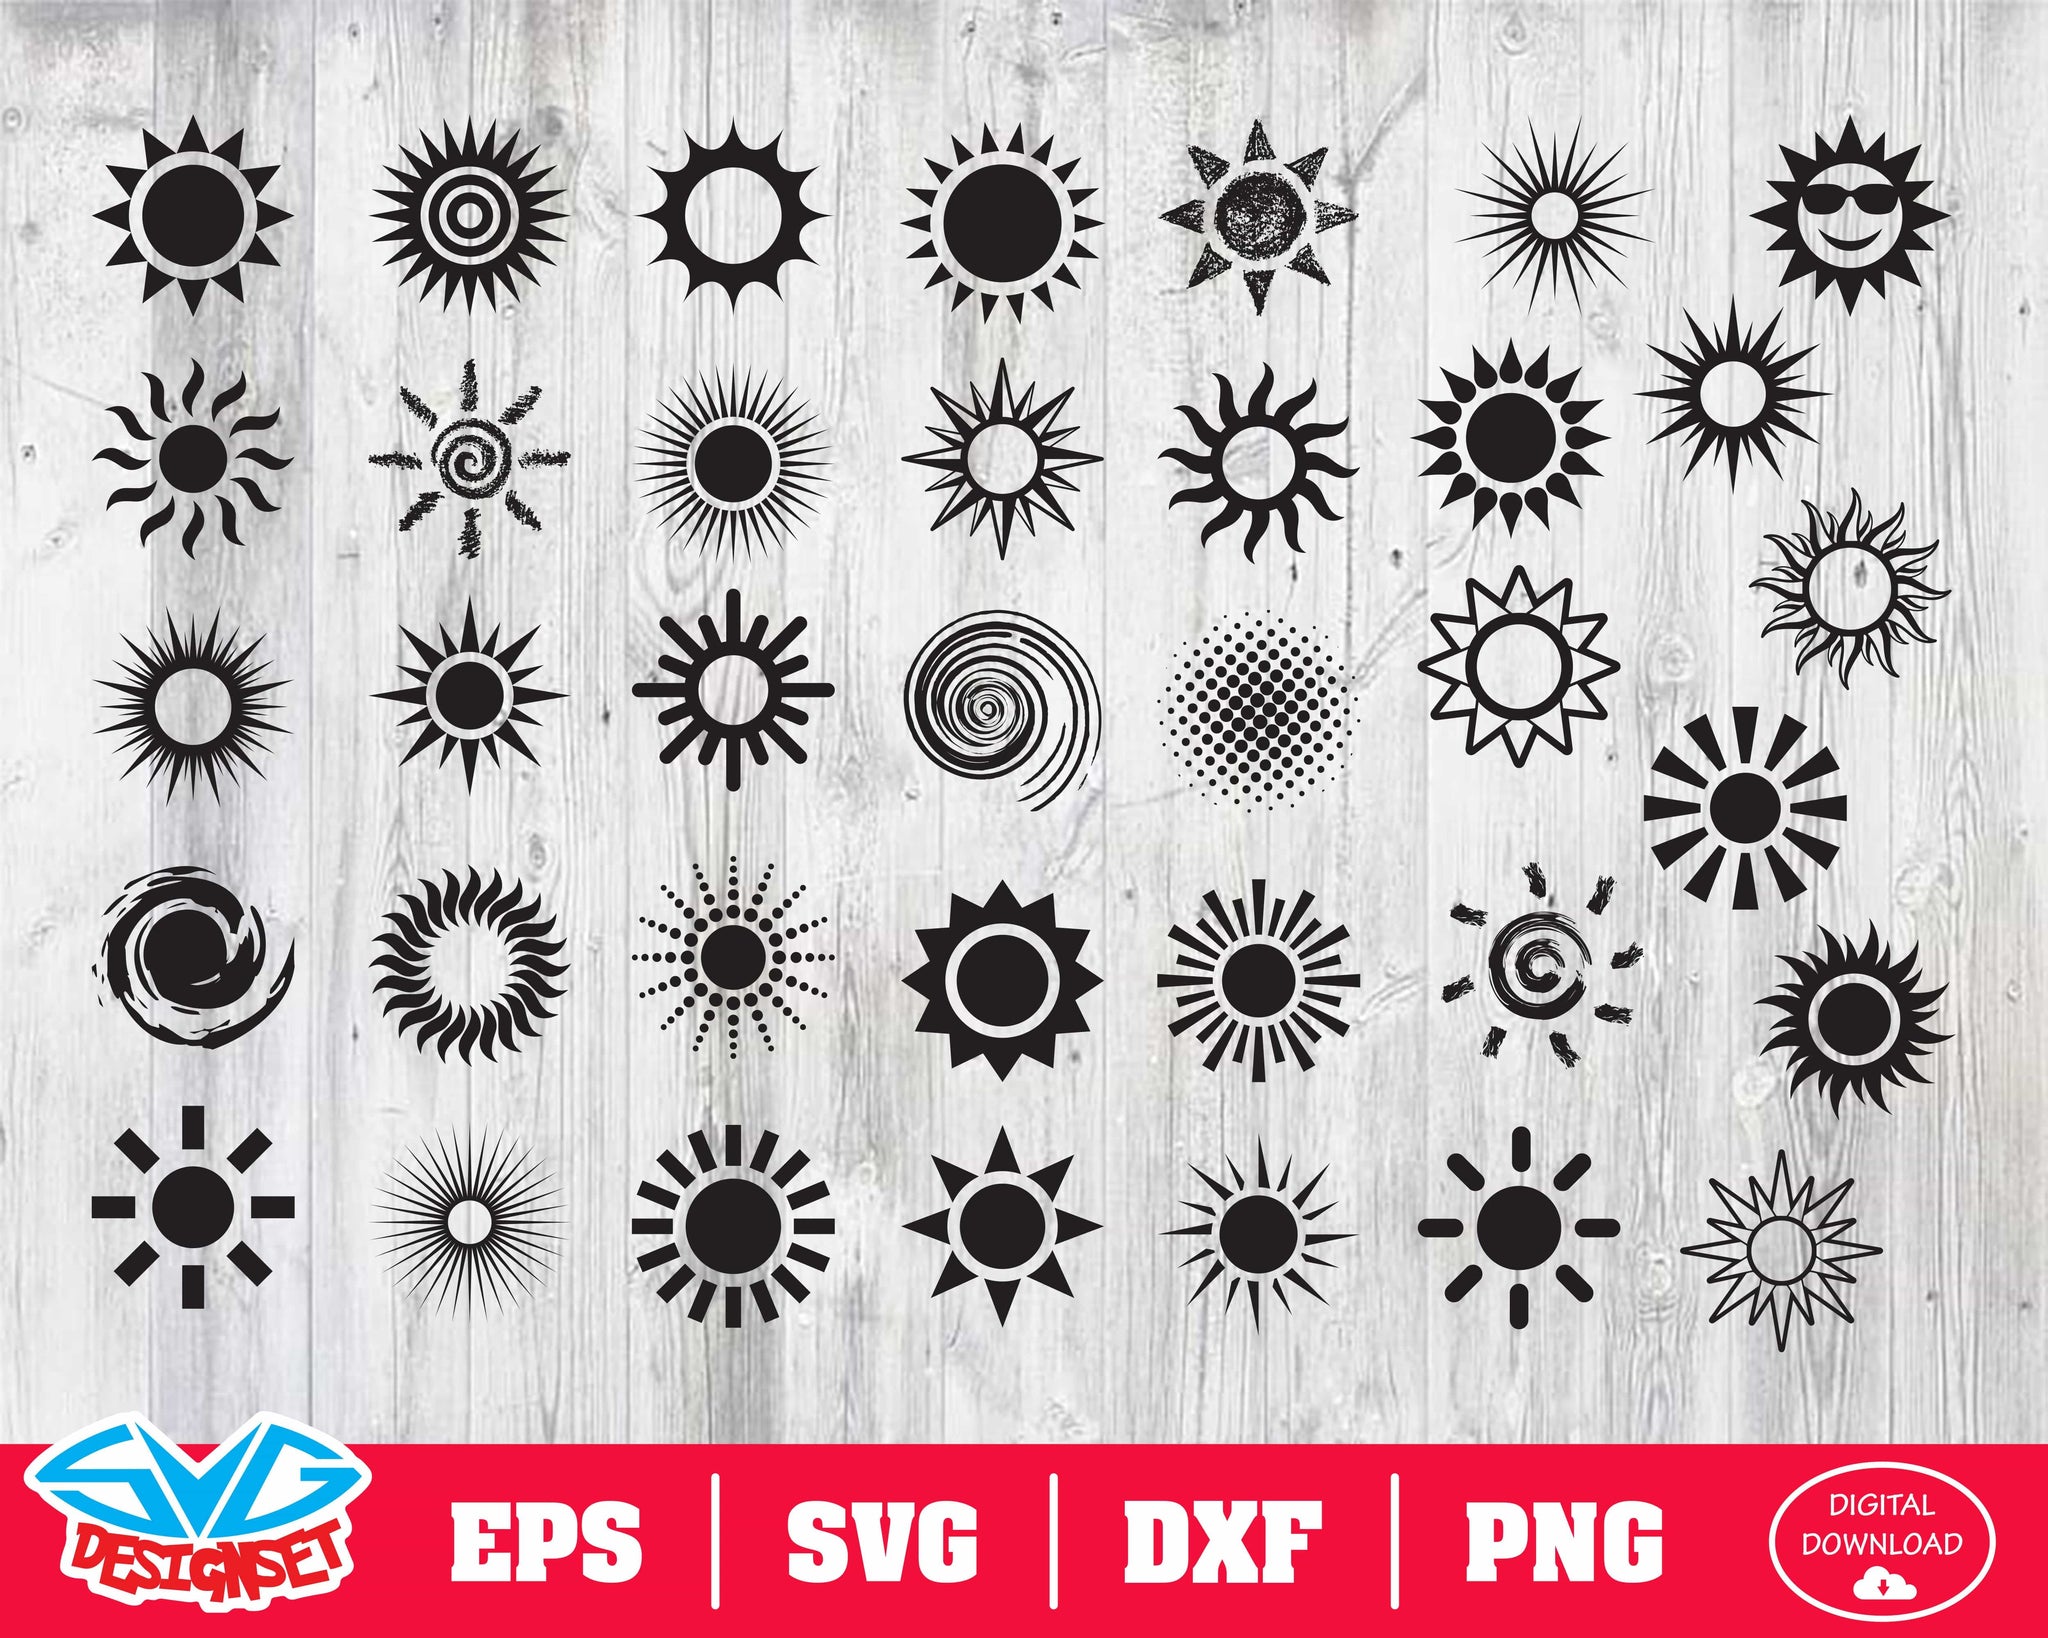 Sun icon Svg, Dxf, Eps, Png, Clipart, Silhouette and Cutfiles - SVGDesignSets